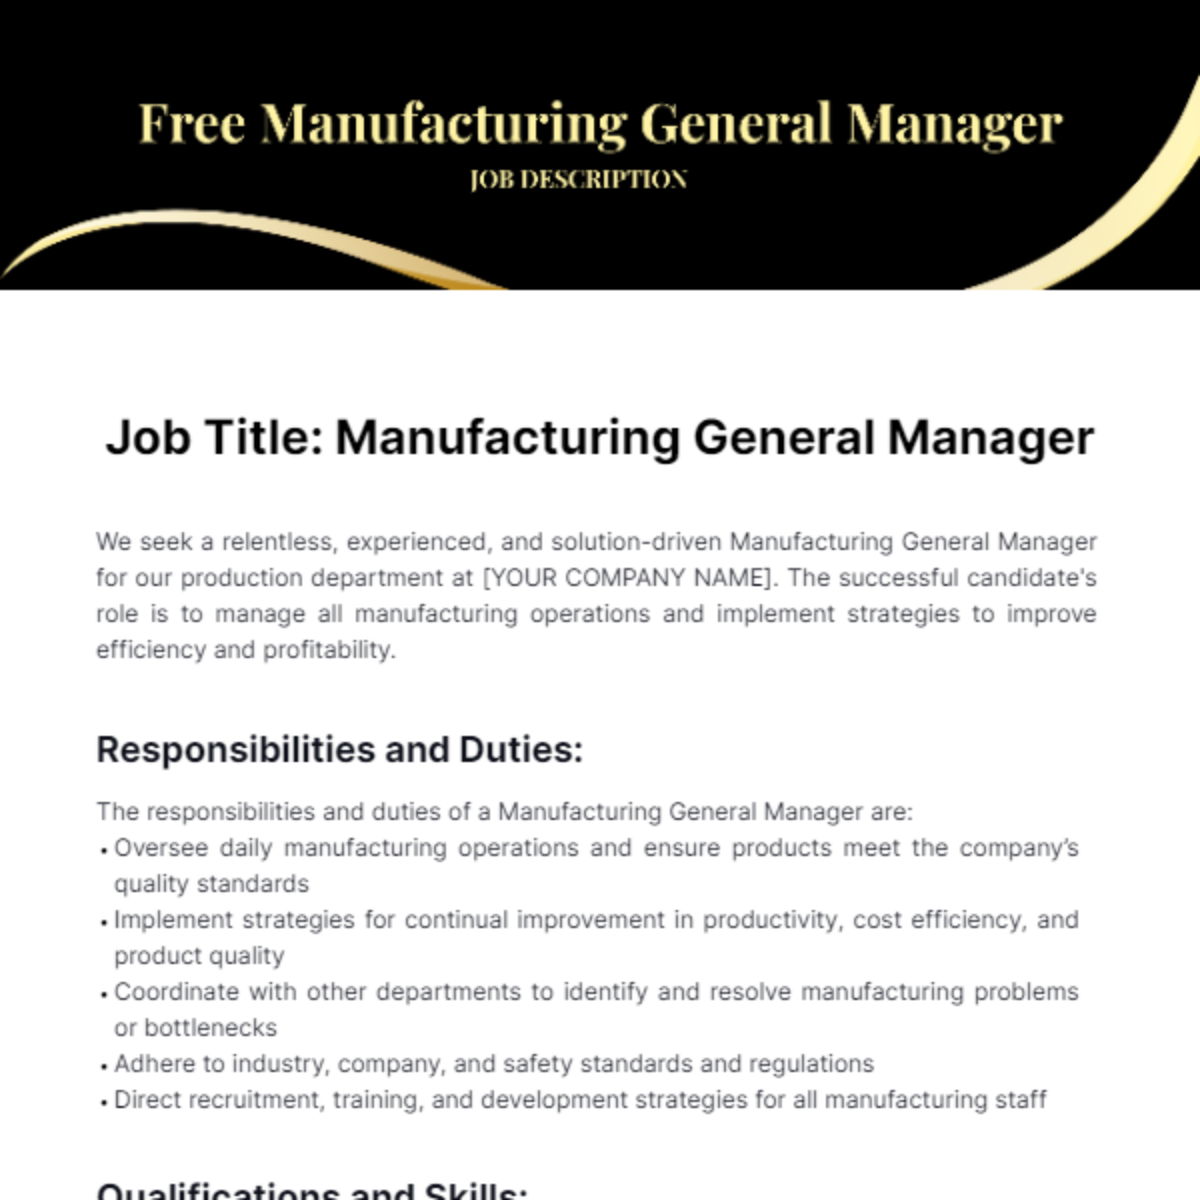 Free Manufacturing General Manager Job Description Template